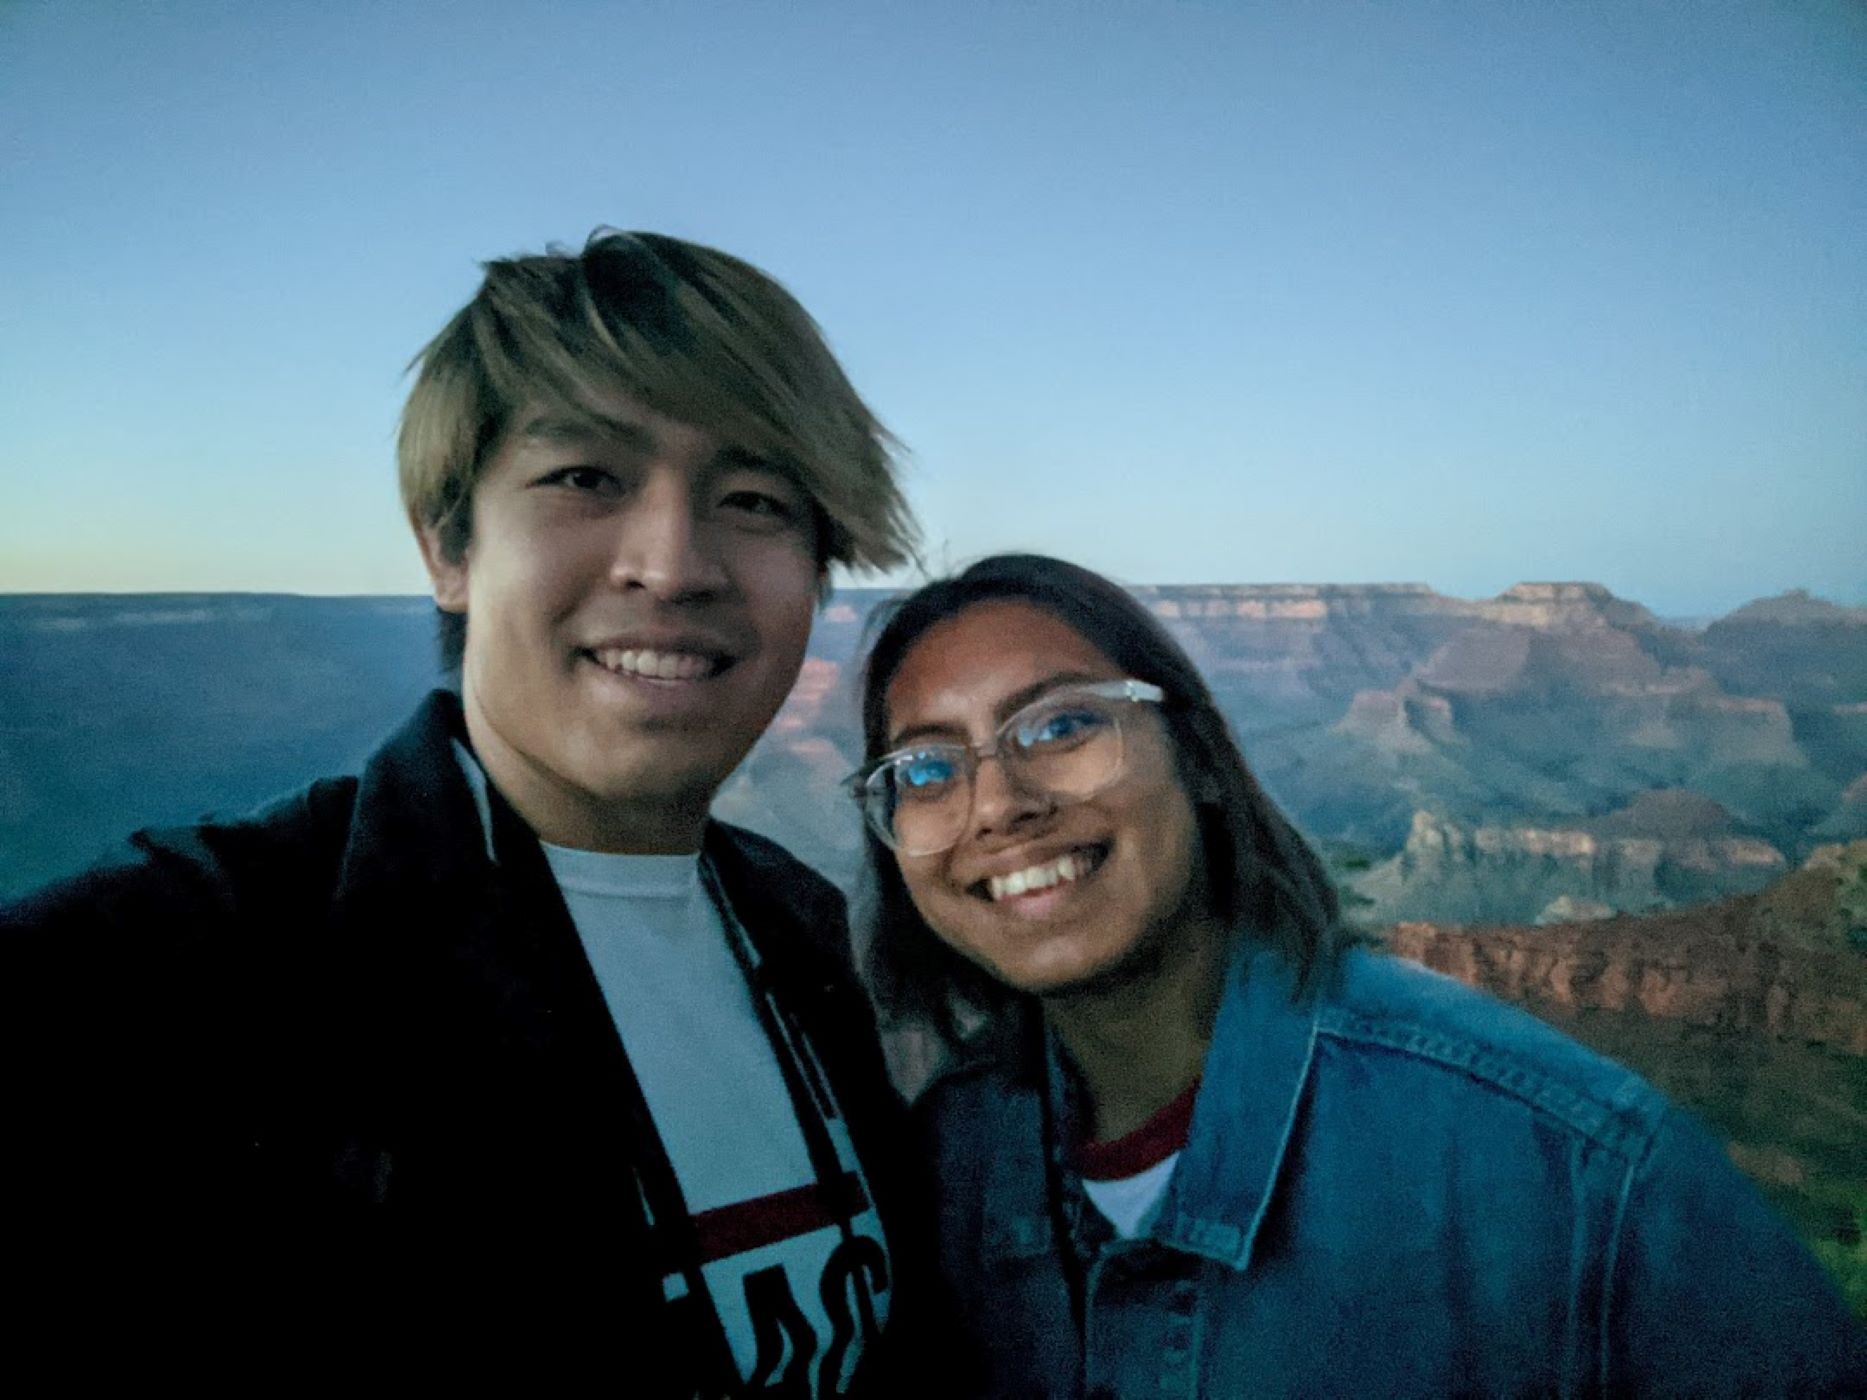 Me and Jen at the Grand Canyon